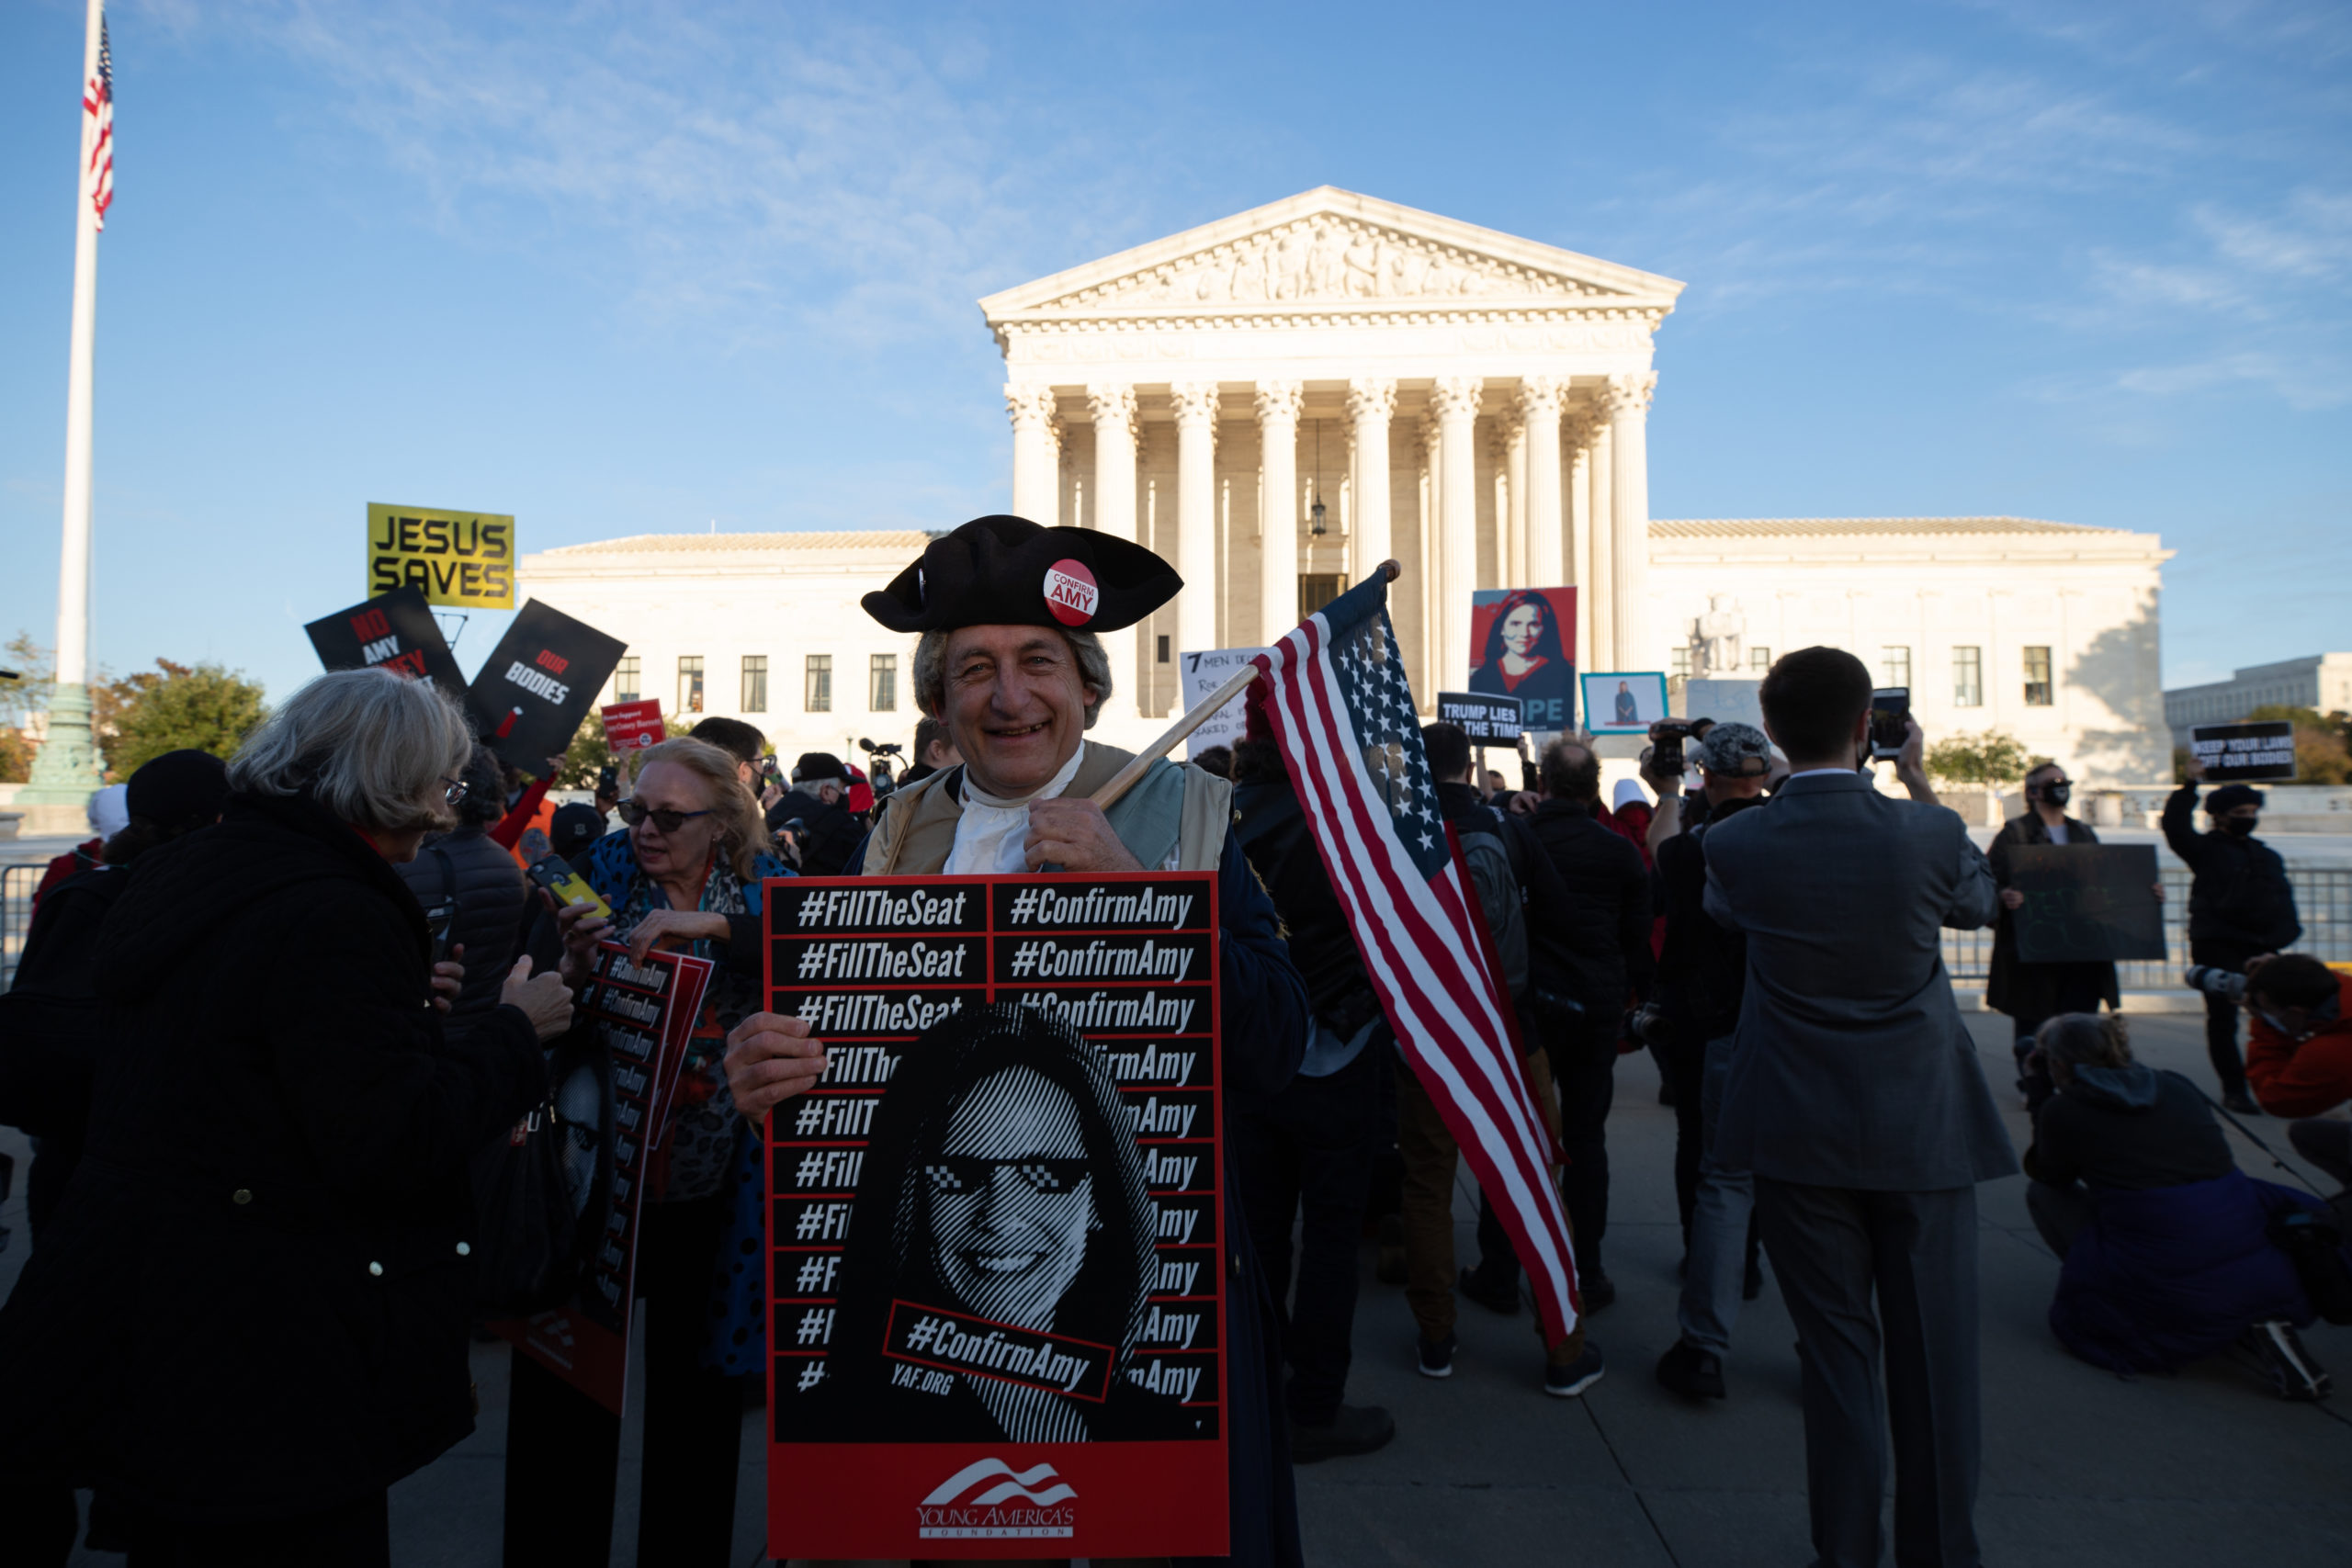 A man dressed as a "founding father" outside the Supreme Court ahead of the Senate vote to confirm Amy Coney Barrett in Washington, D.C. on October 26, 2020. (Kaylee Greenlee - Daily Caller News Foundation)